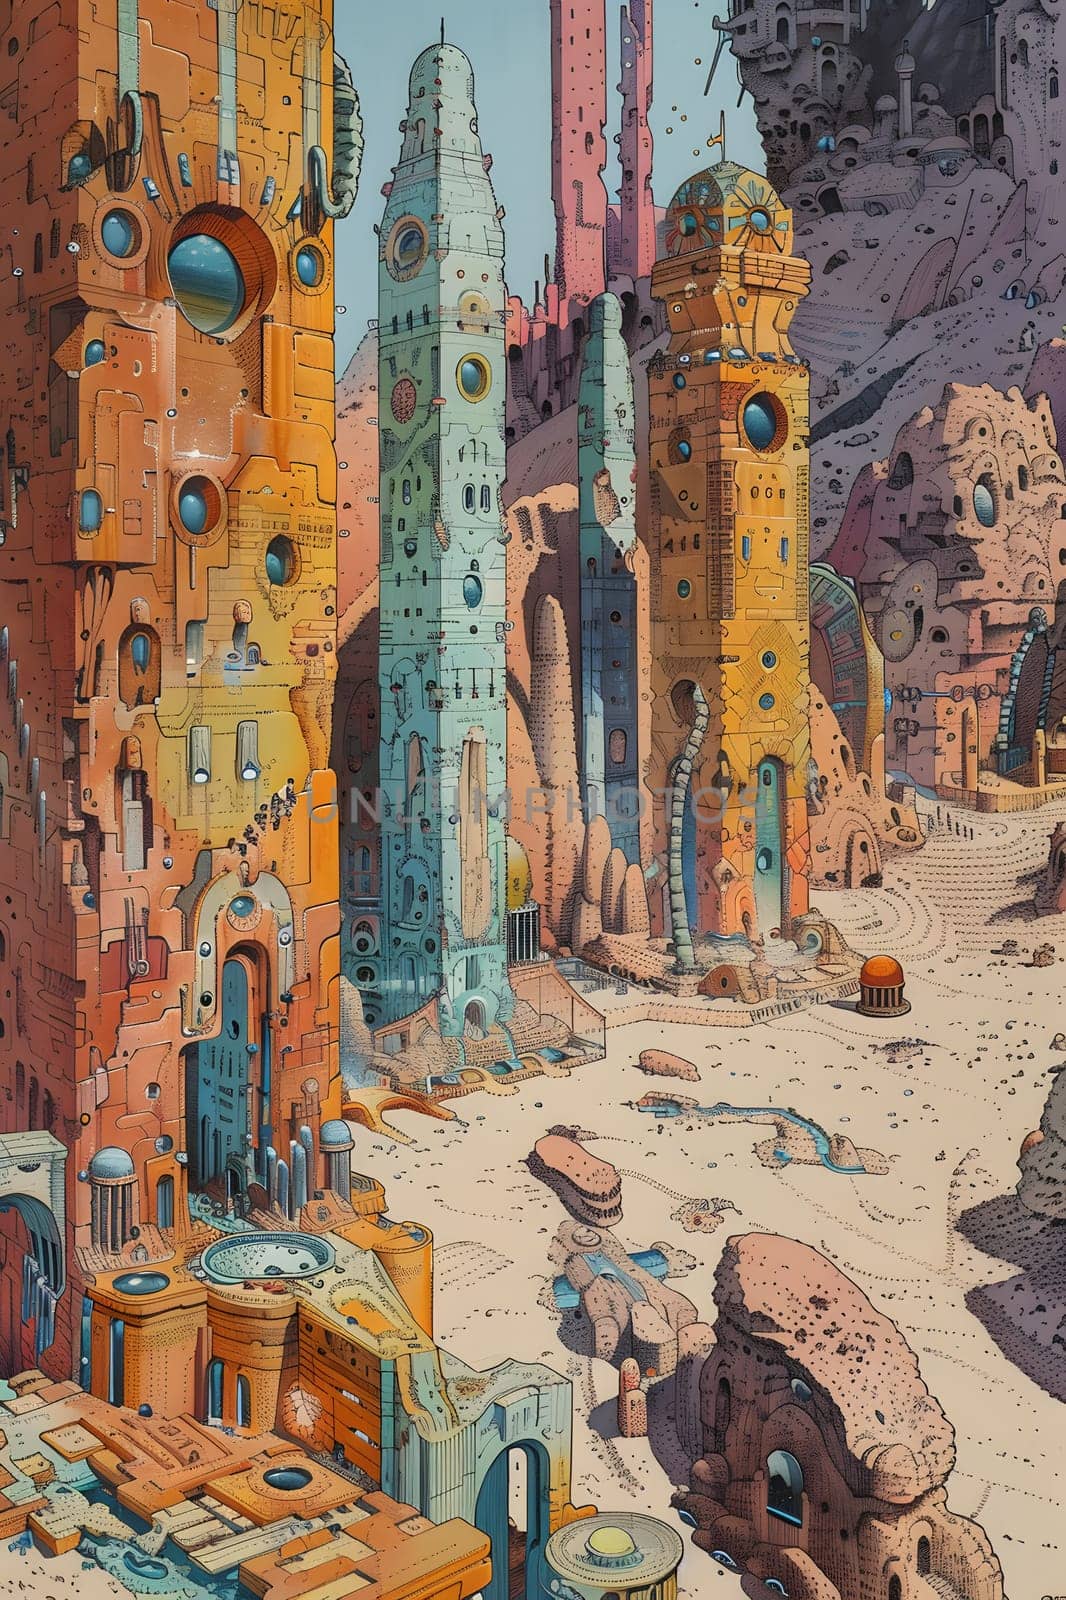 A watercolor painting of a futuristic city emerging from the desert, a creative blend of urban design and natural landscape in the visual arts